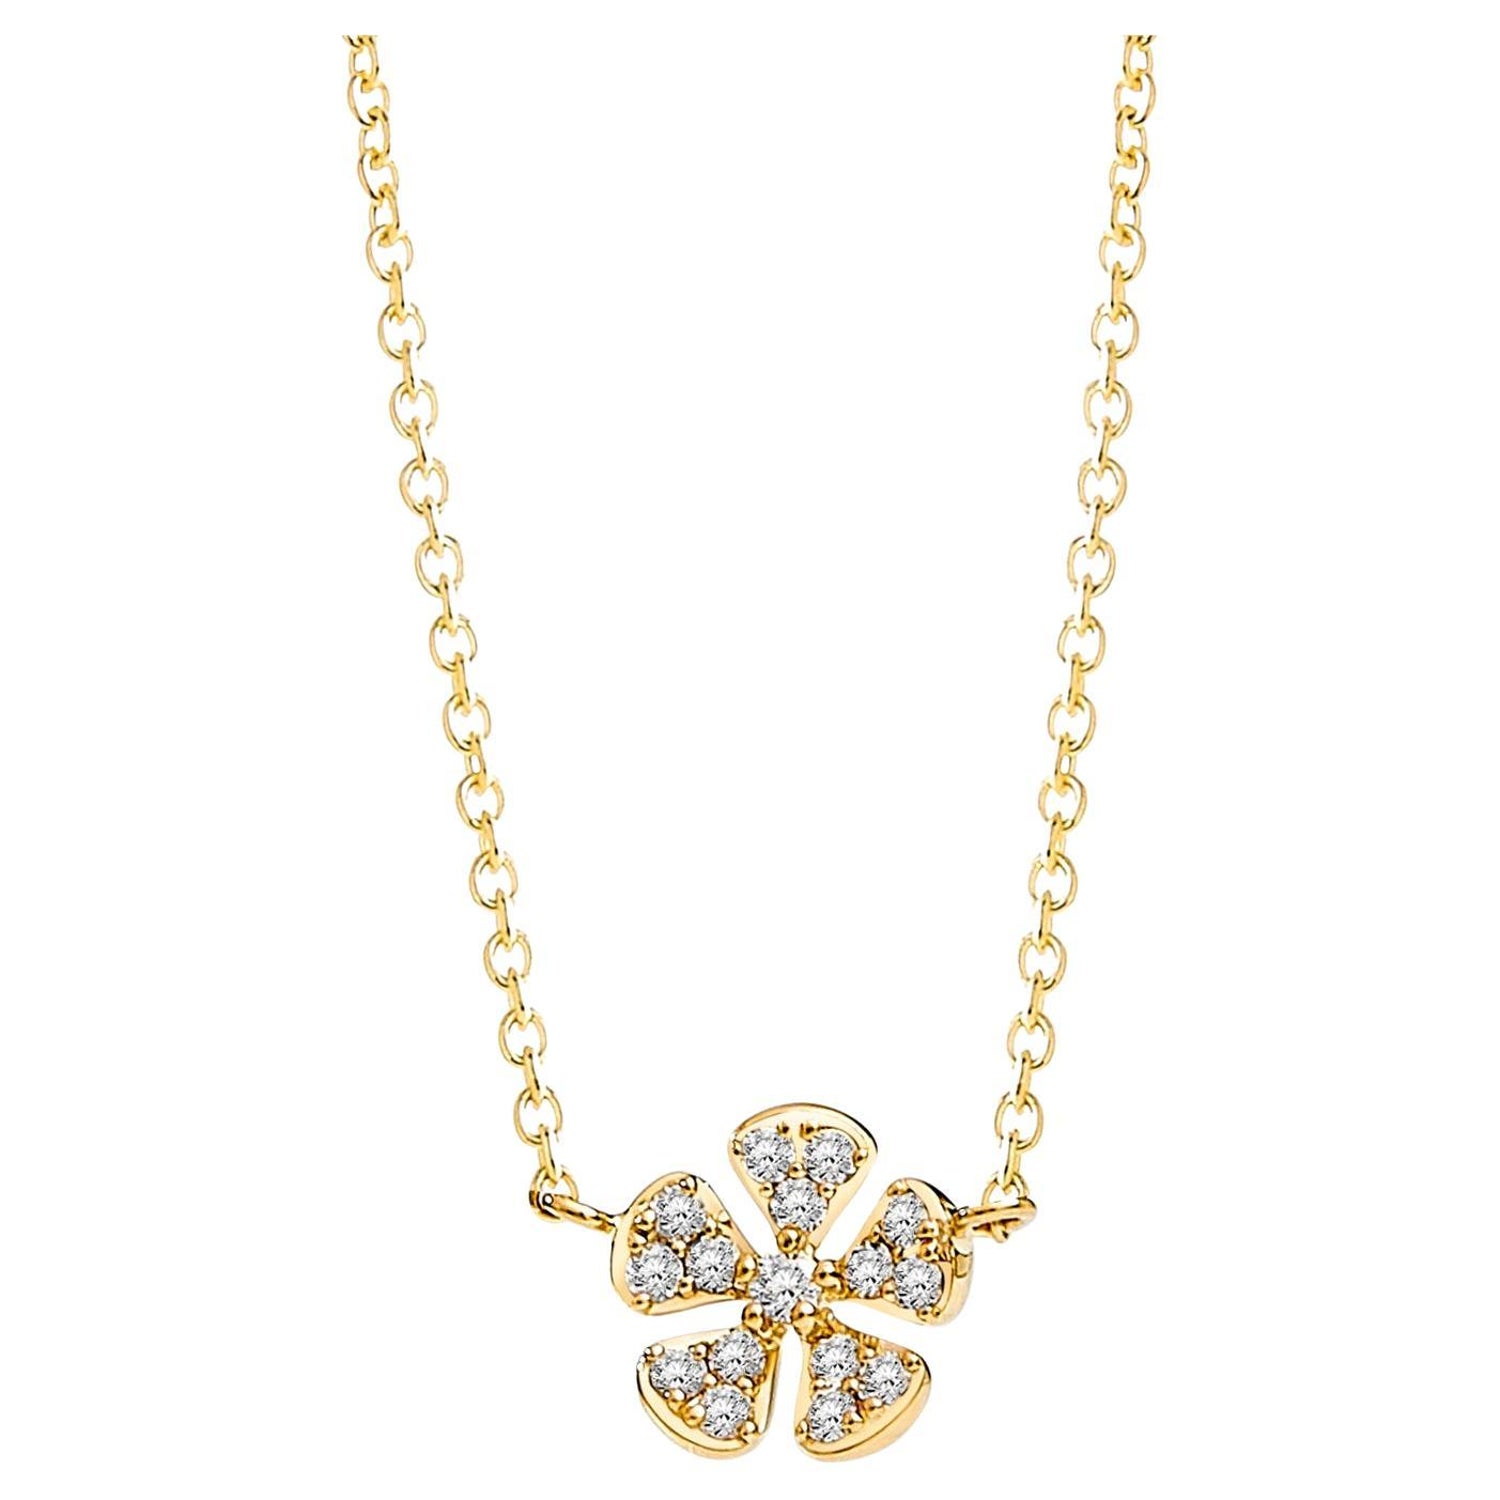 Louis Vuitton Flower Necklace - 18 For Sale on 1stDibs